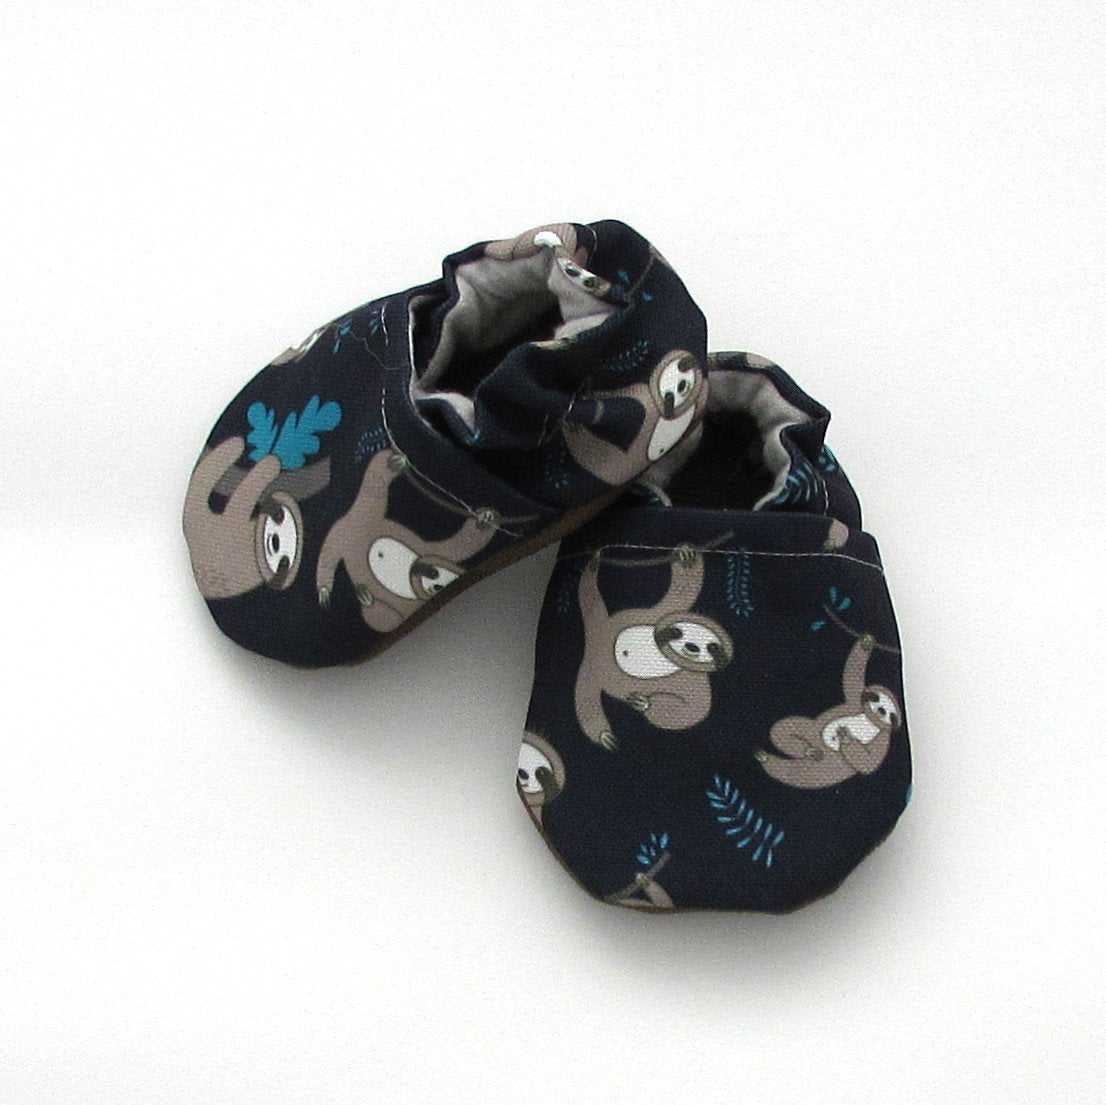 Blue Sloth Baby Shoes that Stay On Sloth Shoes